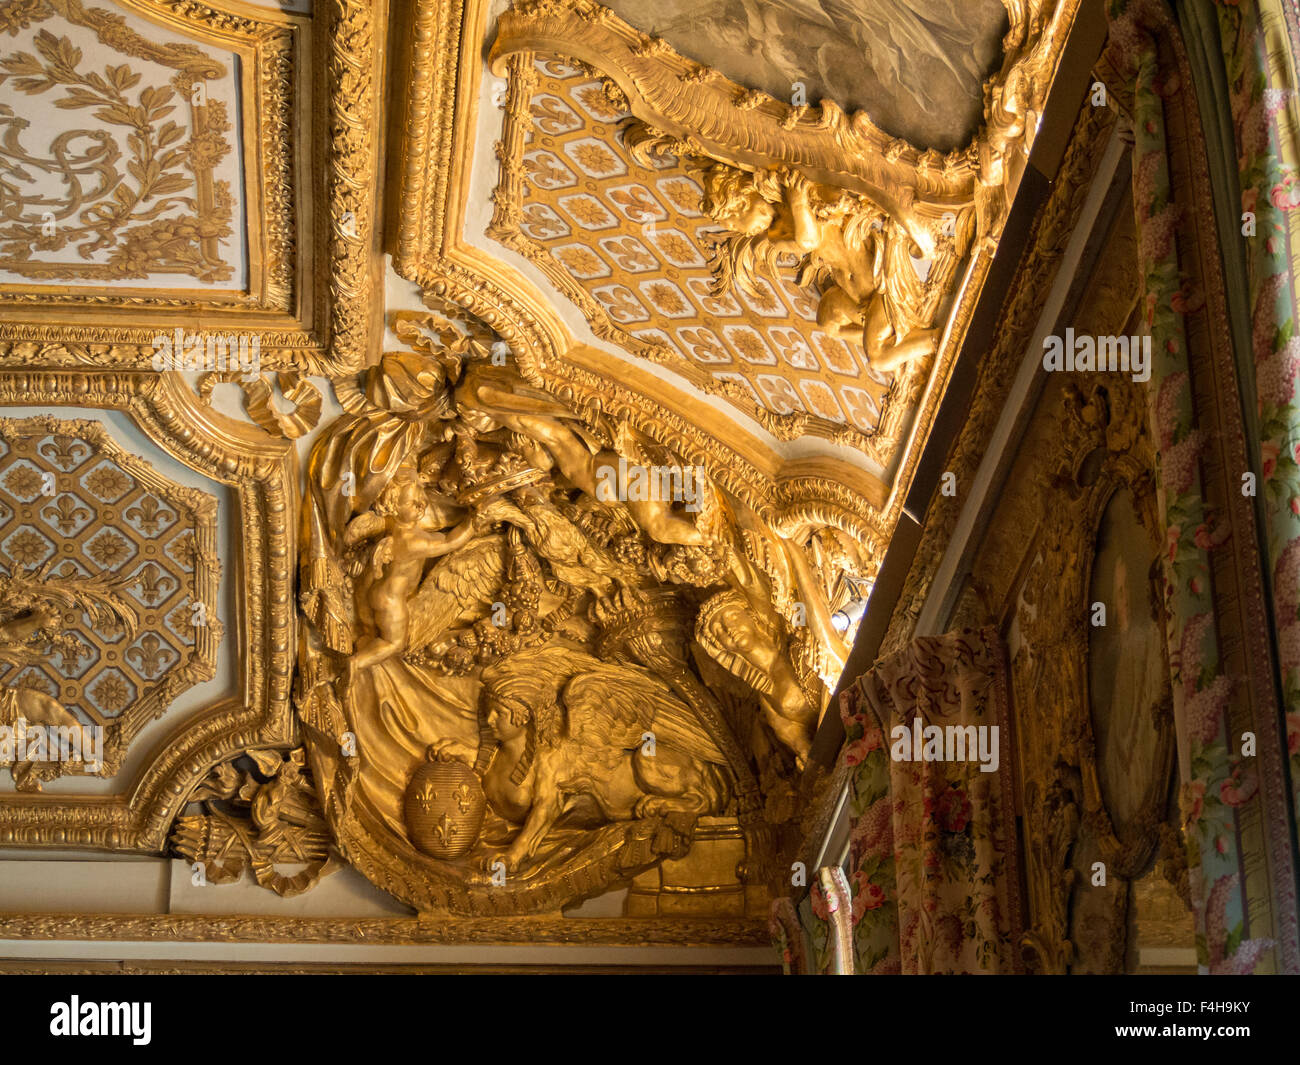 Golden ceiling corner detail from Versailles Palace interior rooms ...